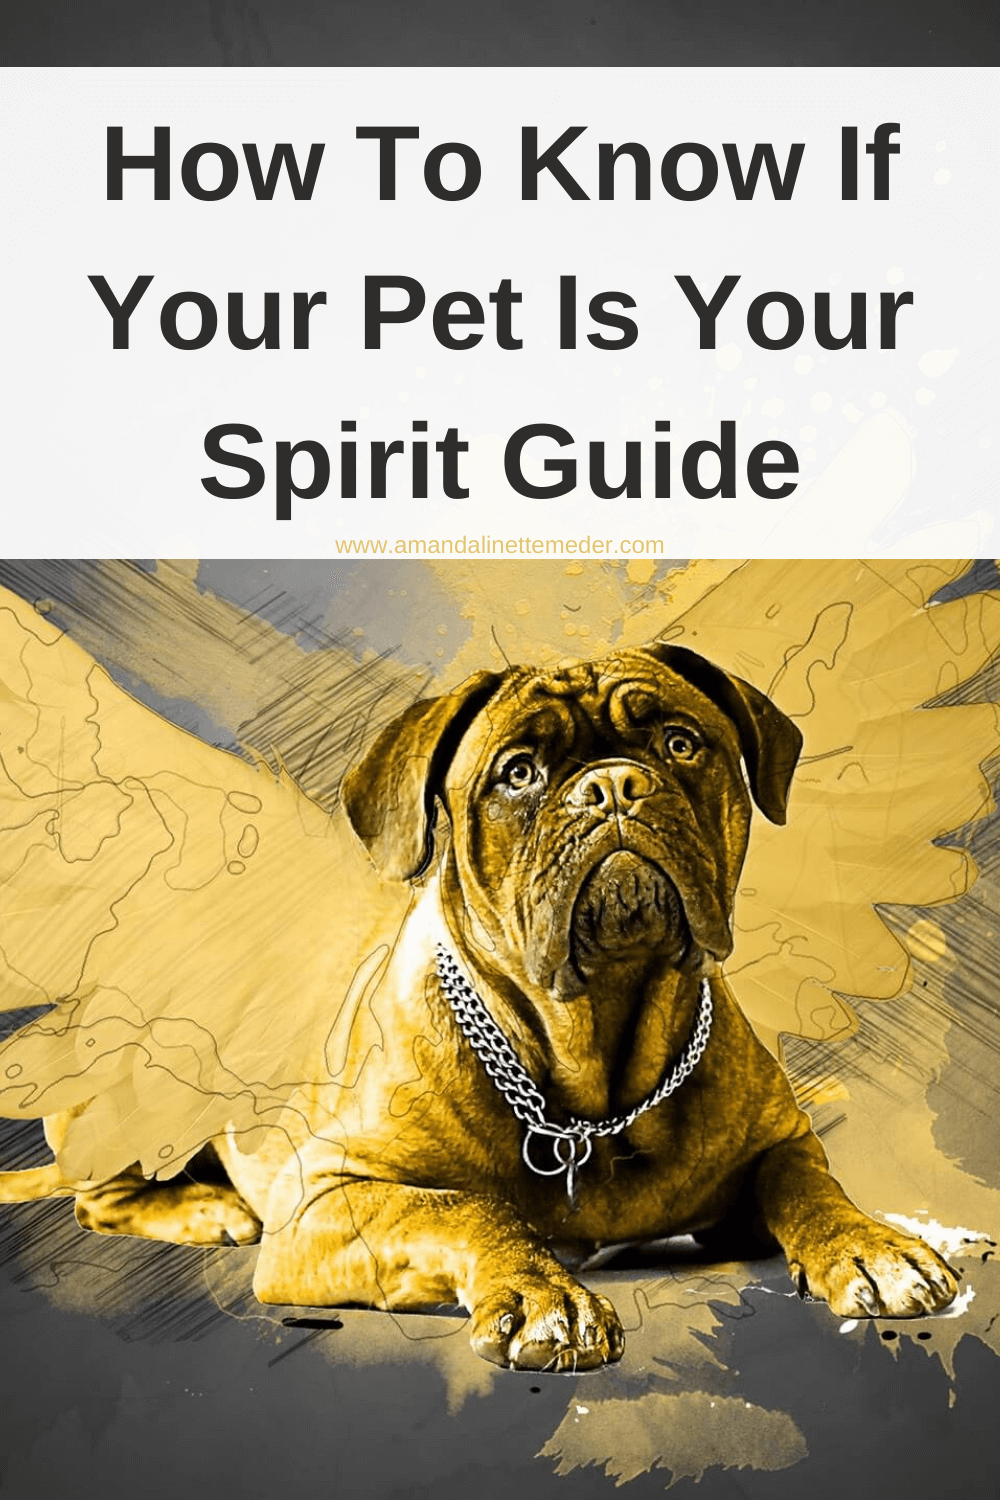 How To Know If Your Pet Is Your Spirit Guide — Amanda Linette Meder